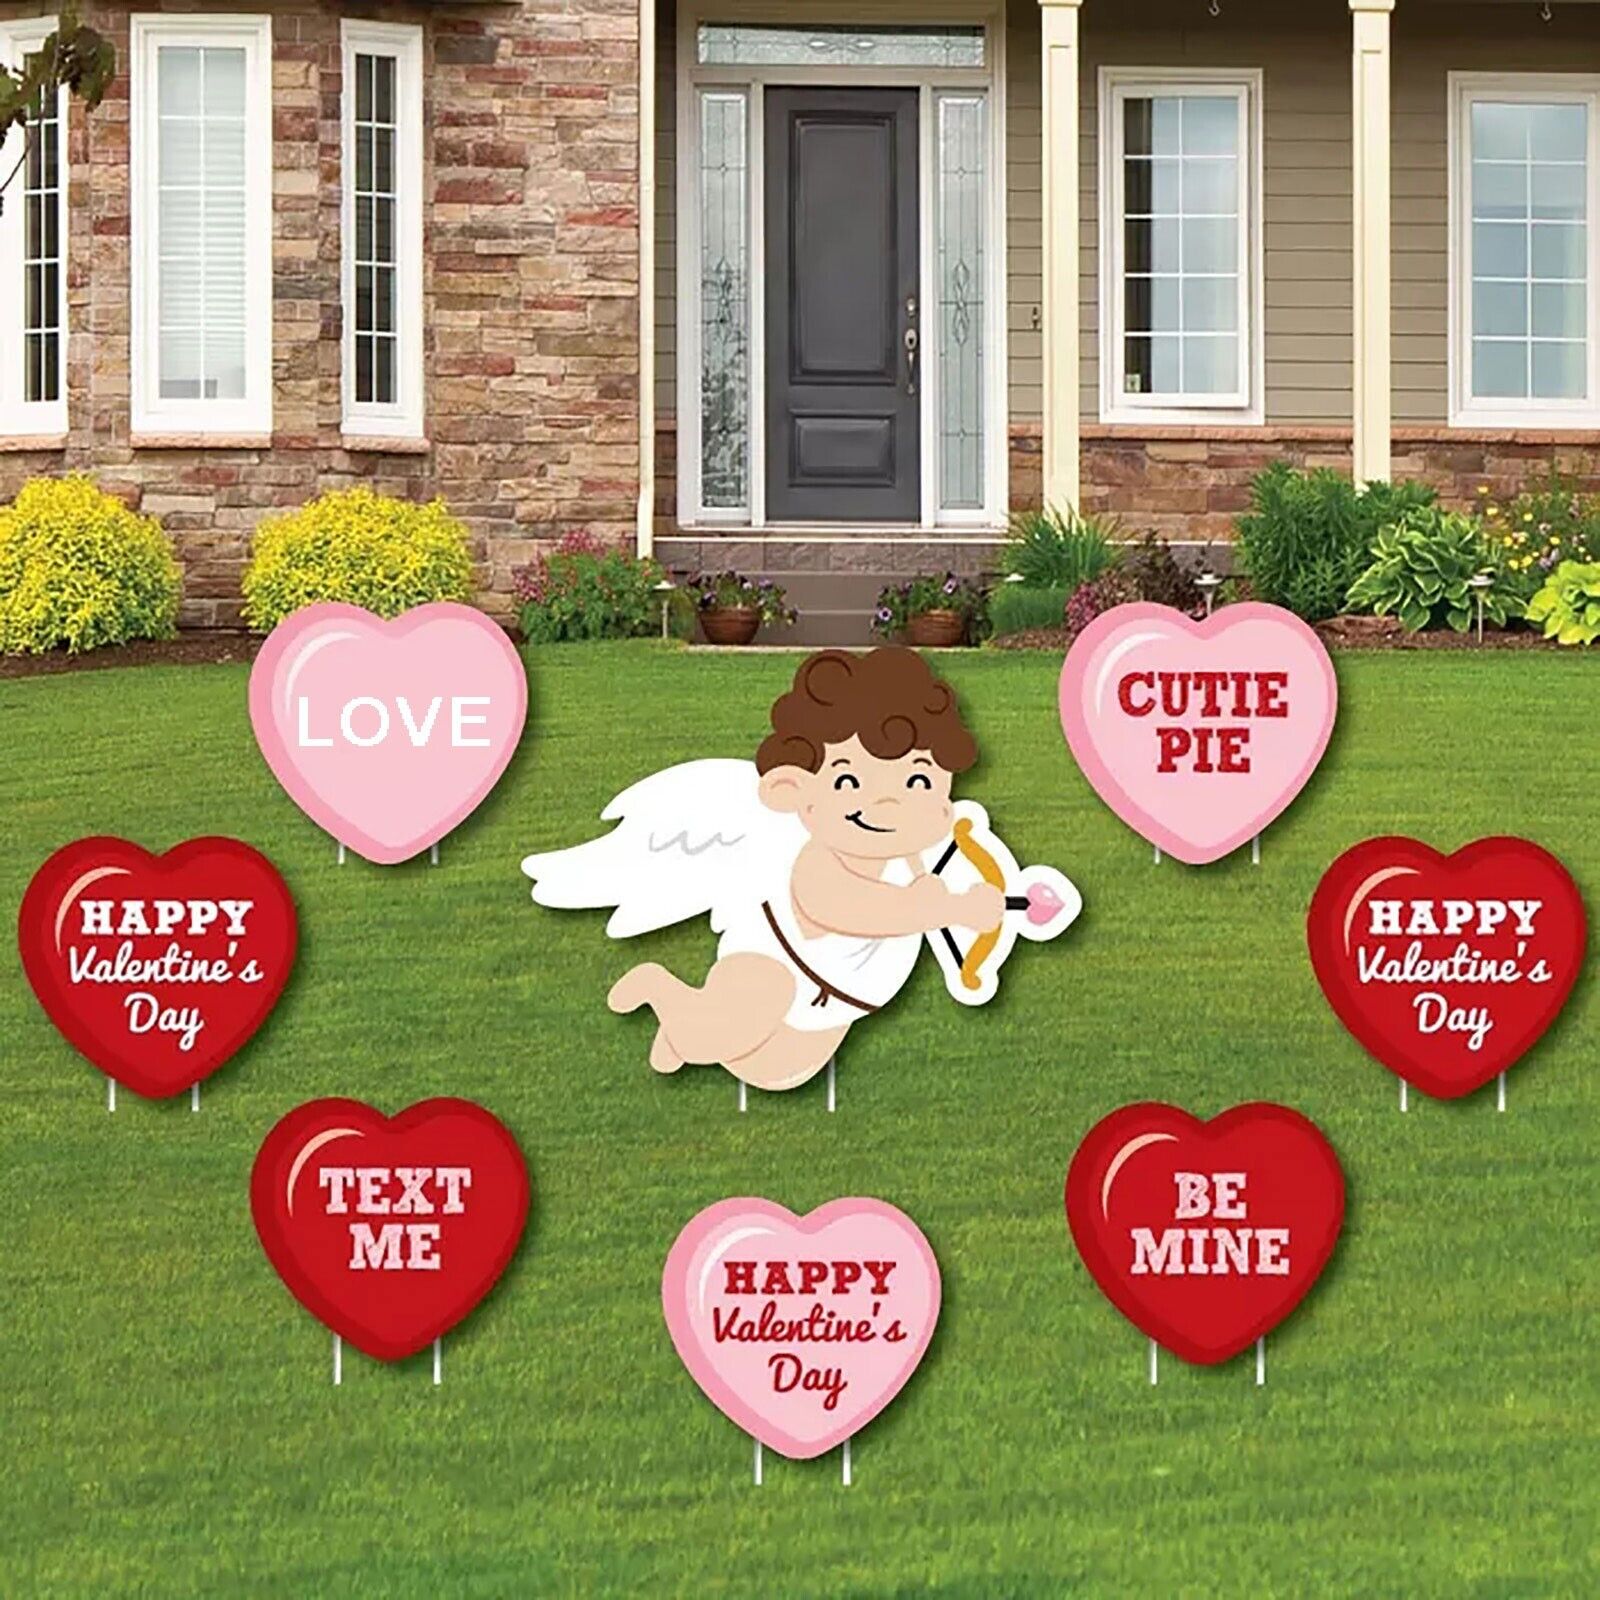 Valentine's Day Decoration Card With Stakes, Outdoor Garden, Led House Numbers